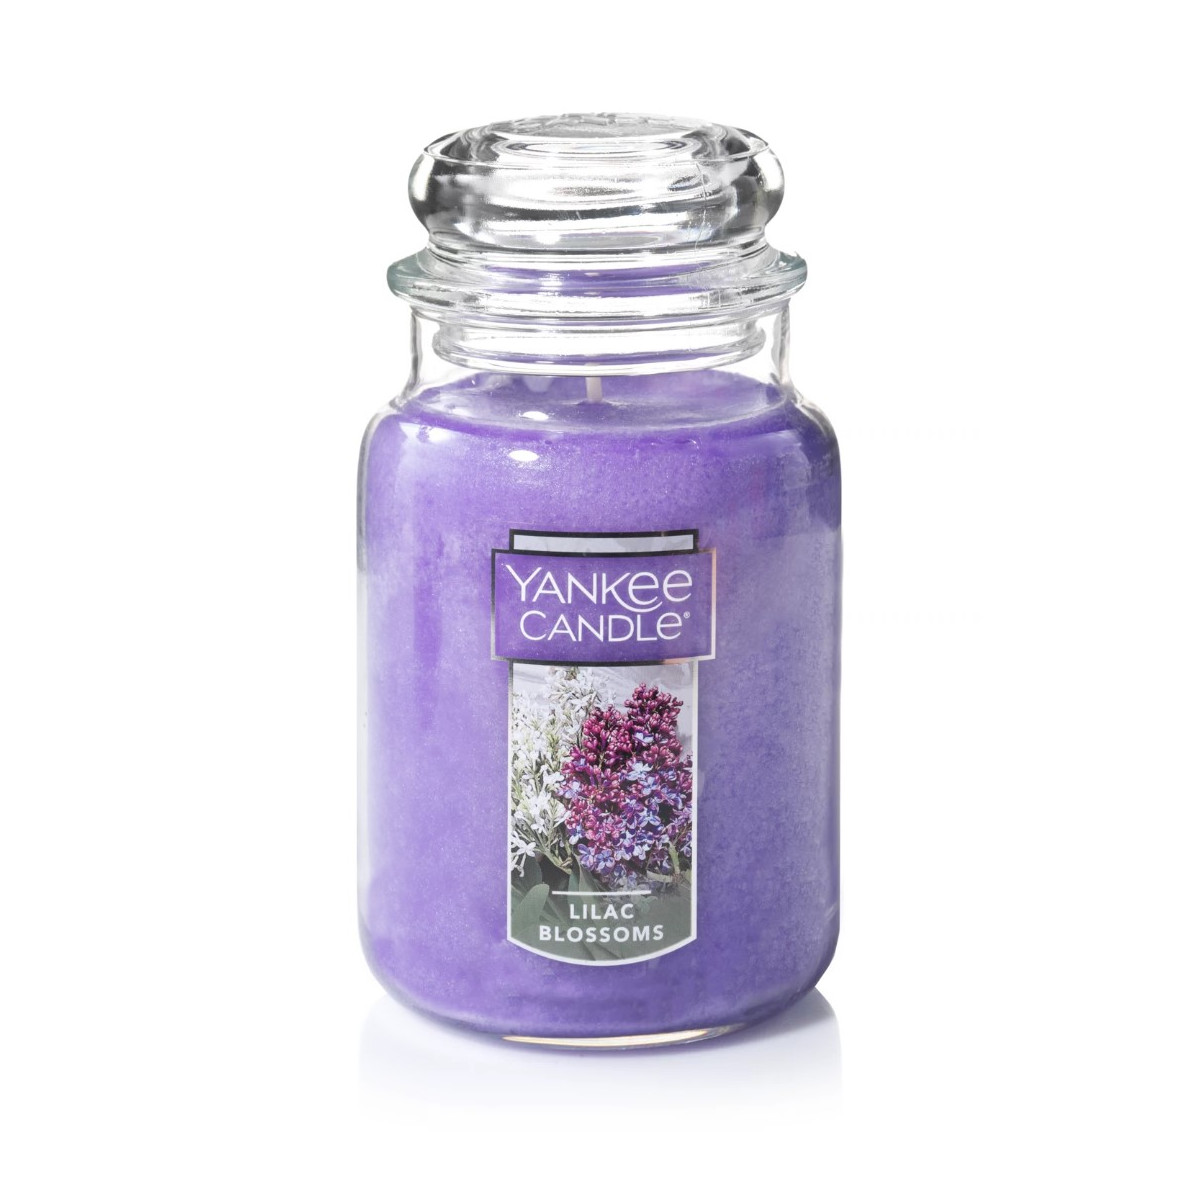 Yankee Candle® Lilac Blossoms Großes Glas 623g, 36,90 €